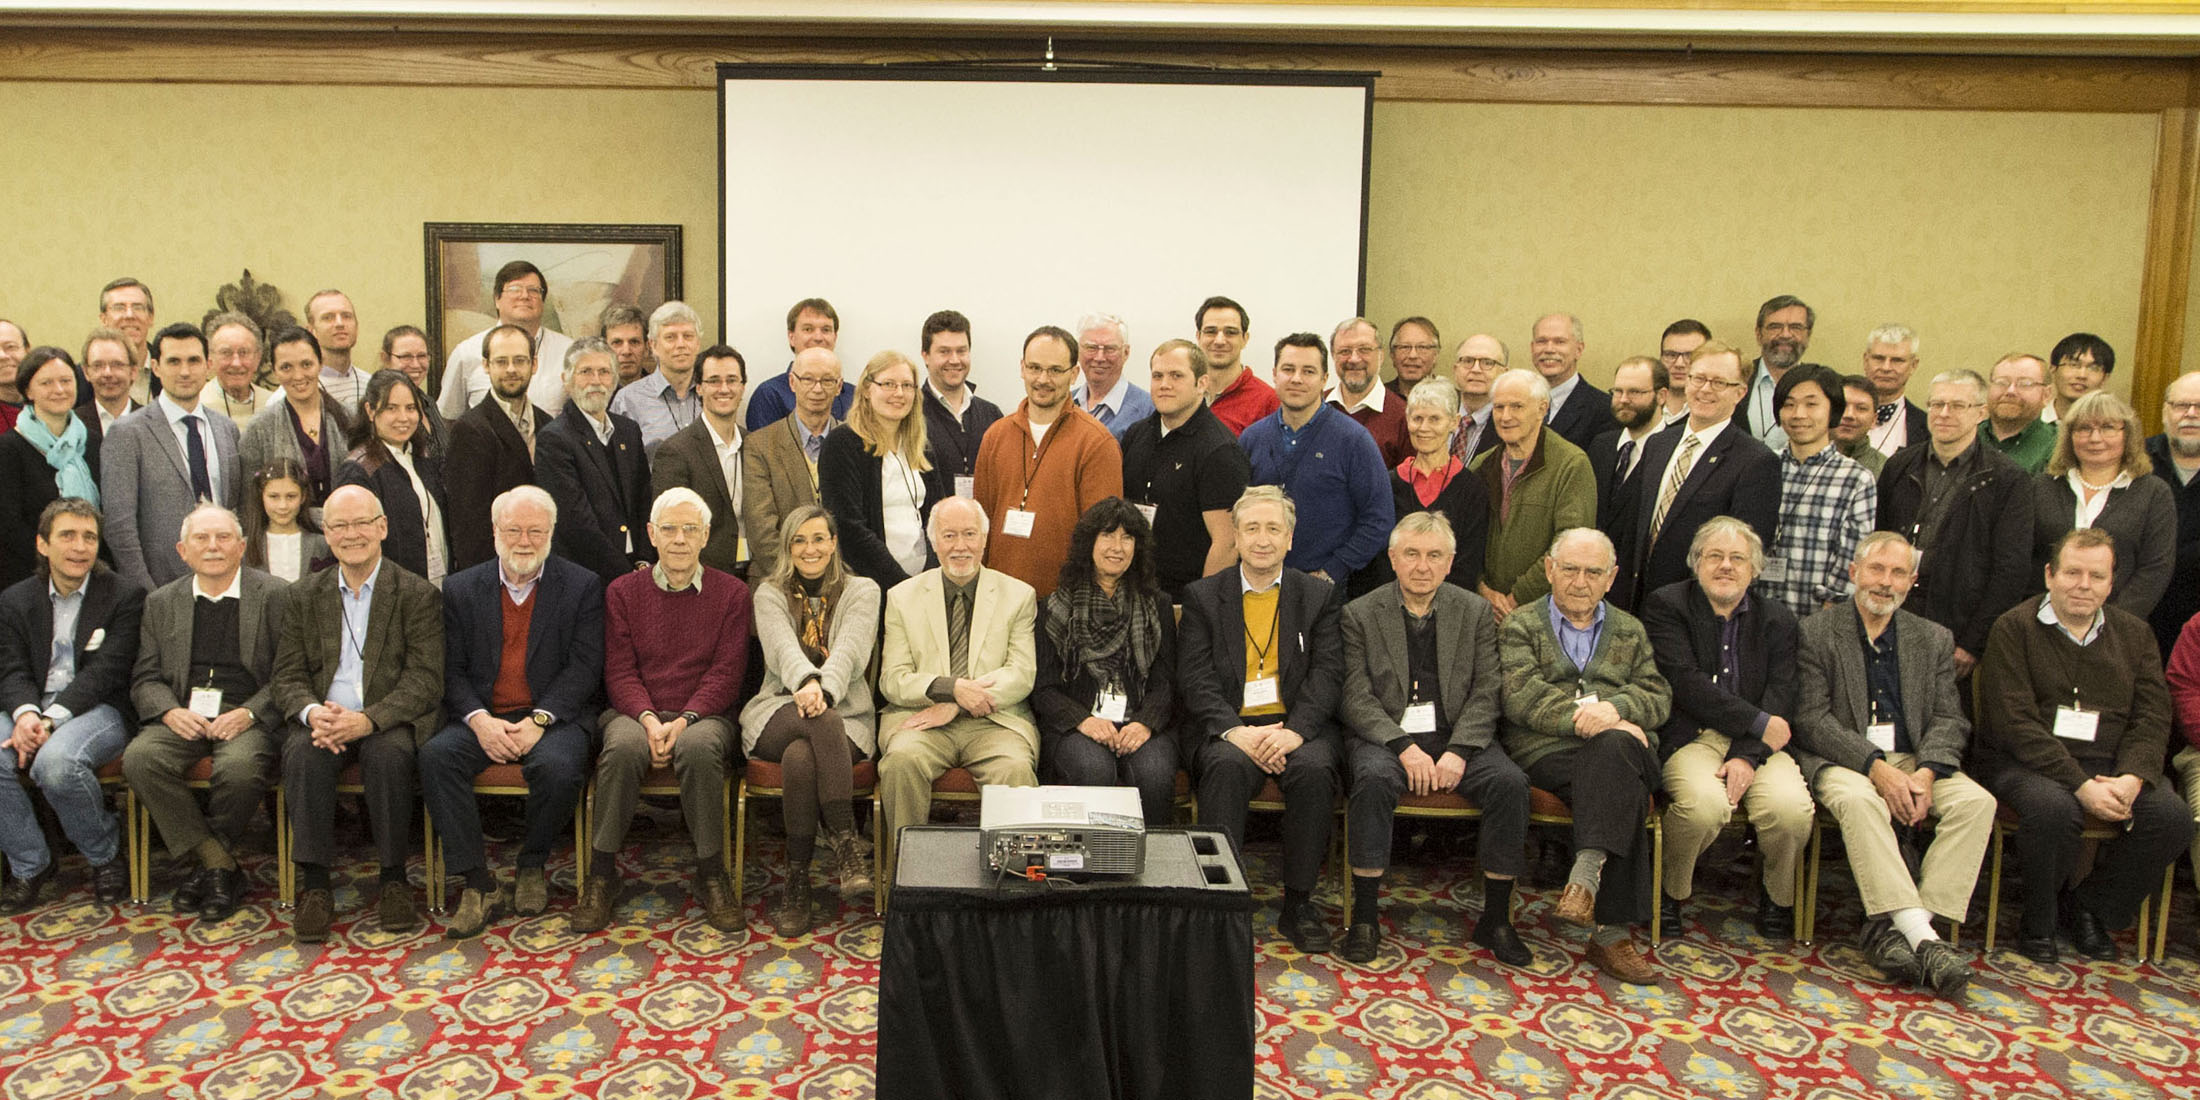 2014 ASMD Conference